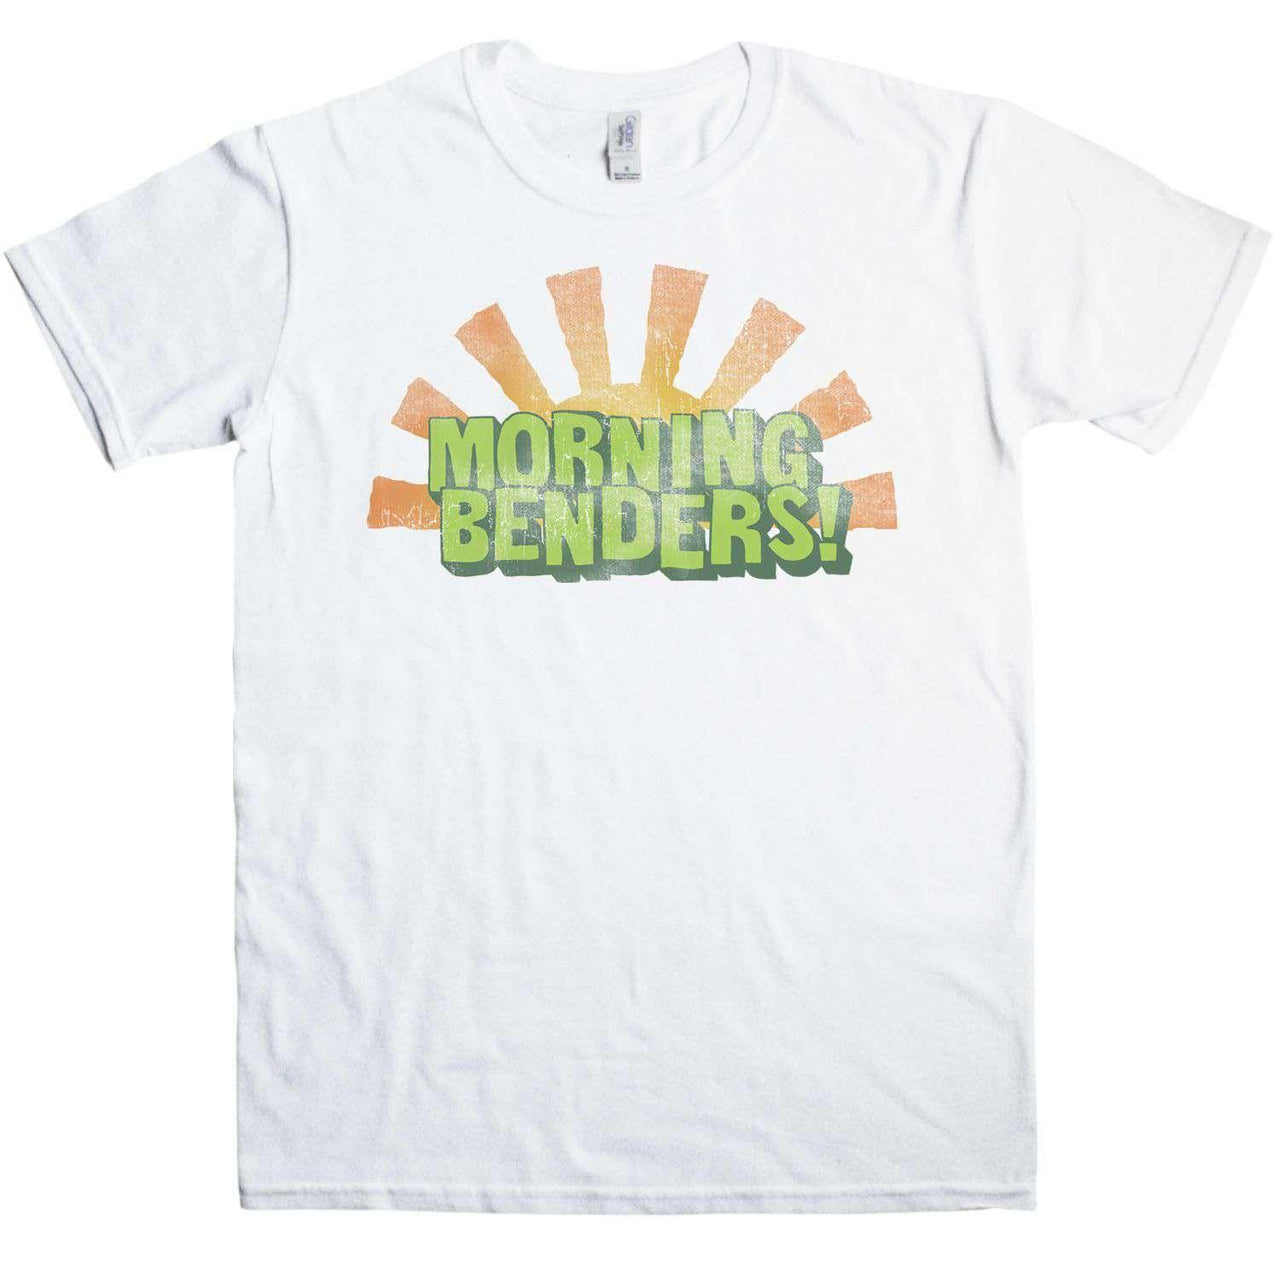 Morning Benders Graphic T-Shirt For Men, Inspired By Inbetweeners 8Ball